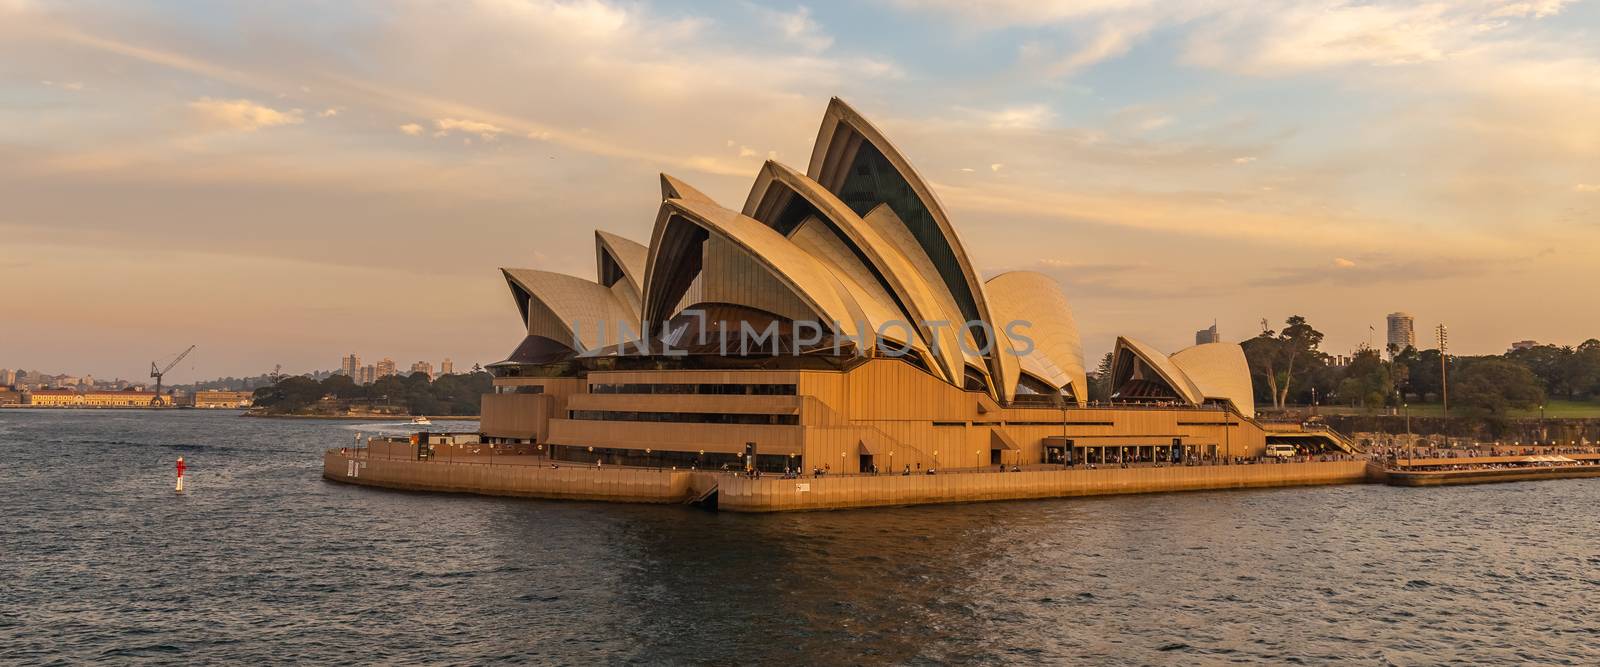 Sydney Harbor, Australia - November 1, 2018: Close view of Sydney Opera House at sunset. Beautiful orange-and-yellow colors. Cloudy sky in the background.